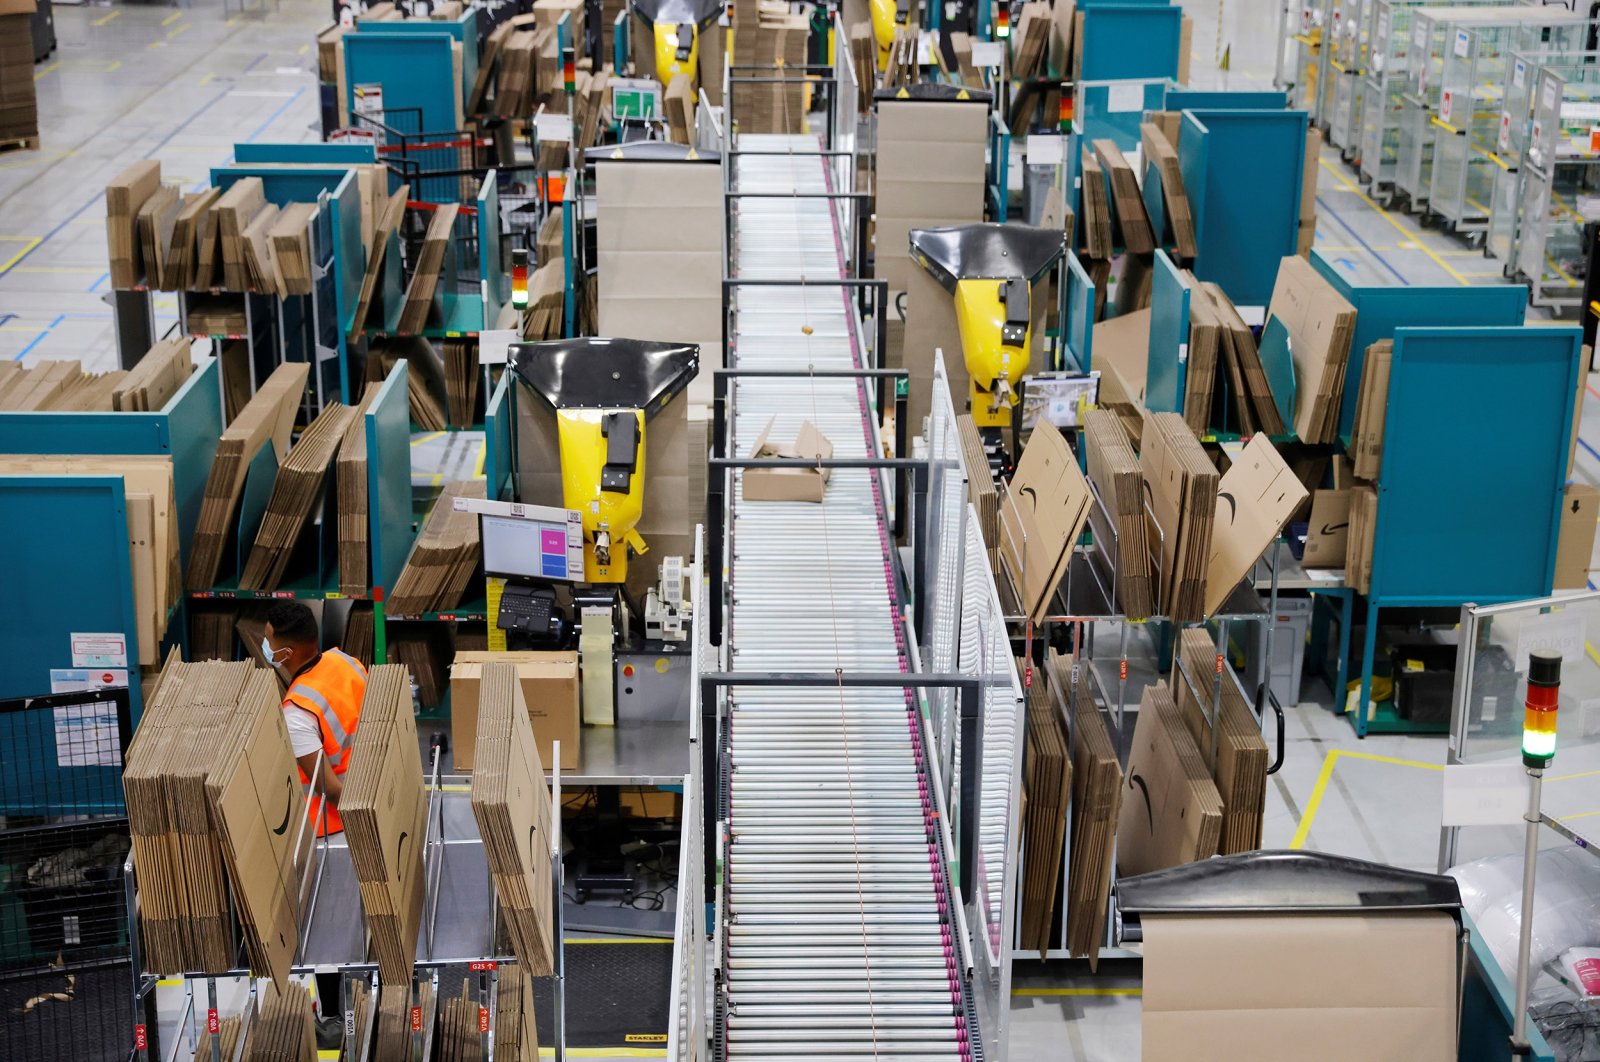 Employees work at the Amazon fulfillment center in Boves near Amiens, France, Sept. 29, 2020. (Reuters Photo)